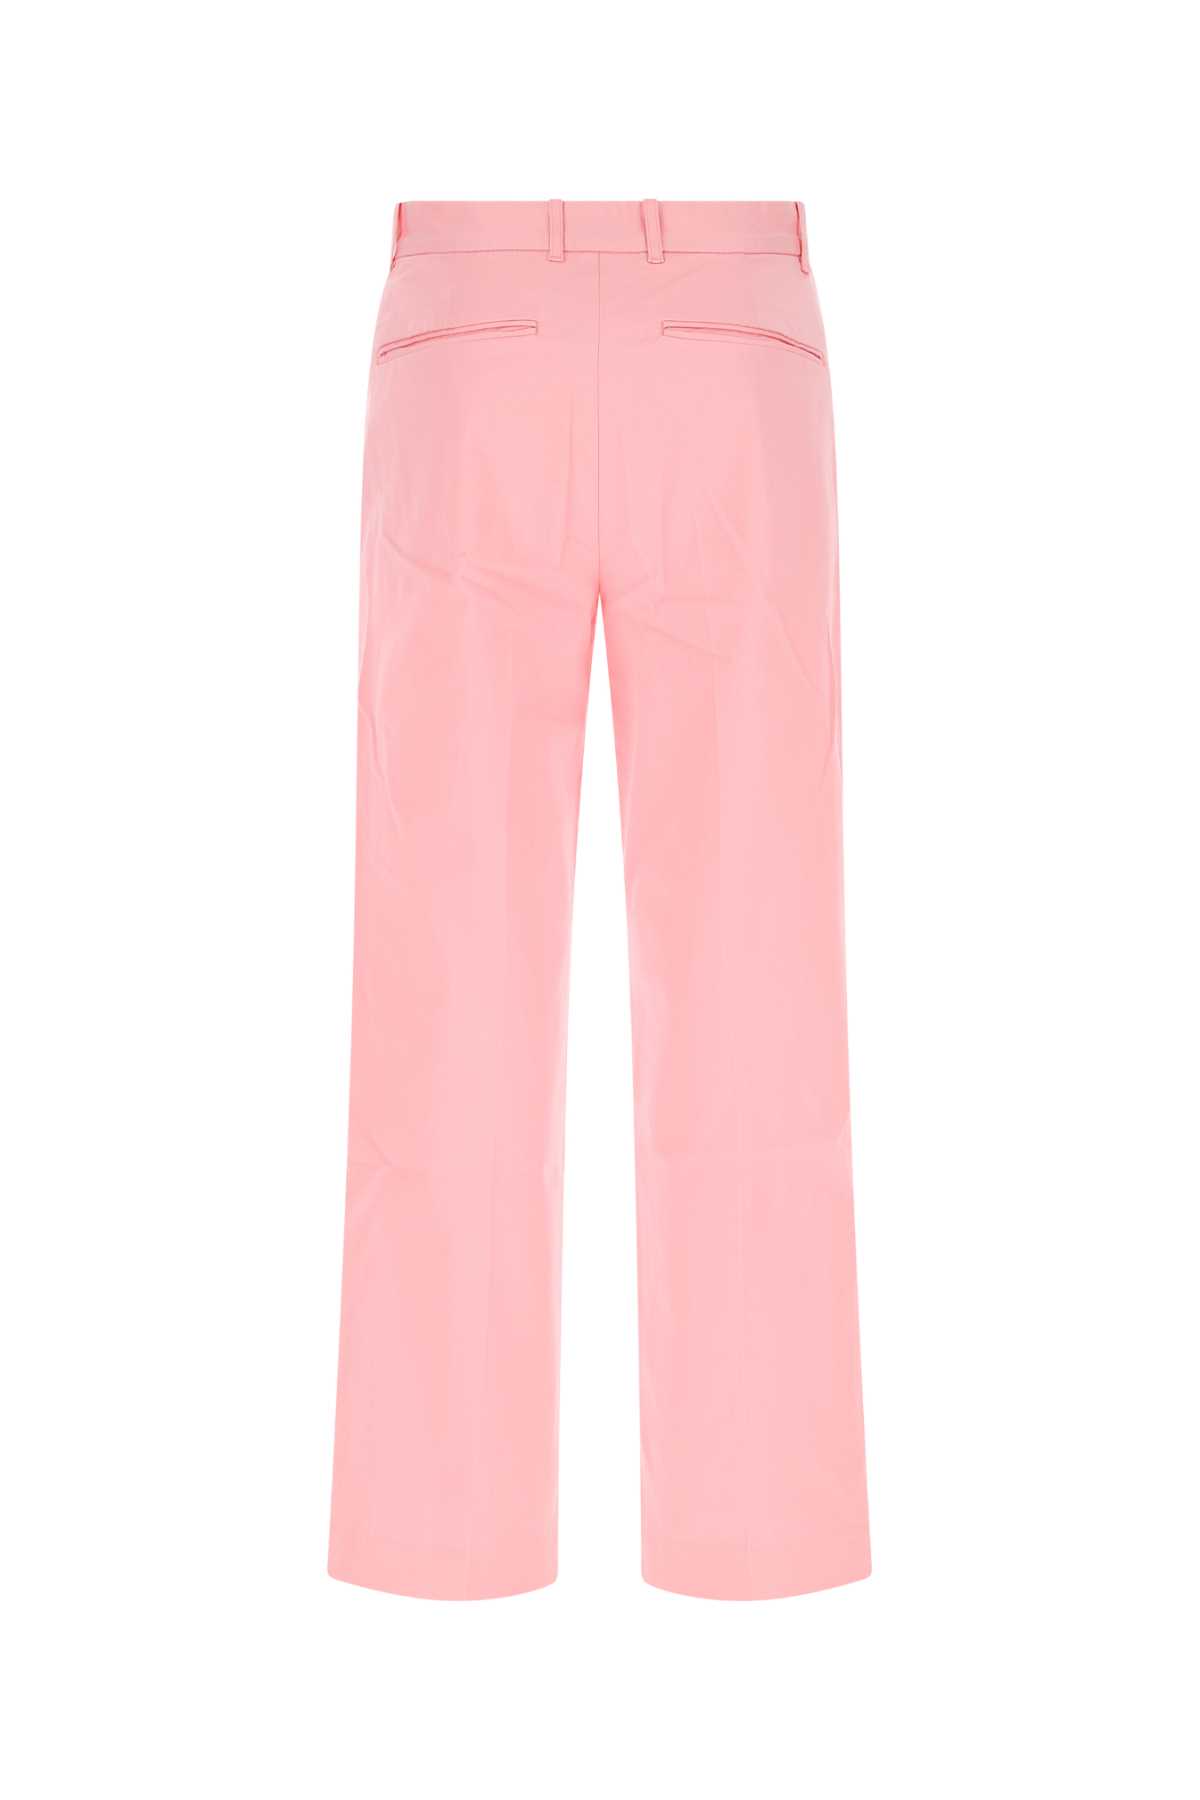 Lacoste Pink Stretch Cotton Pant In 7sy